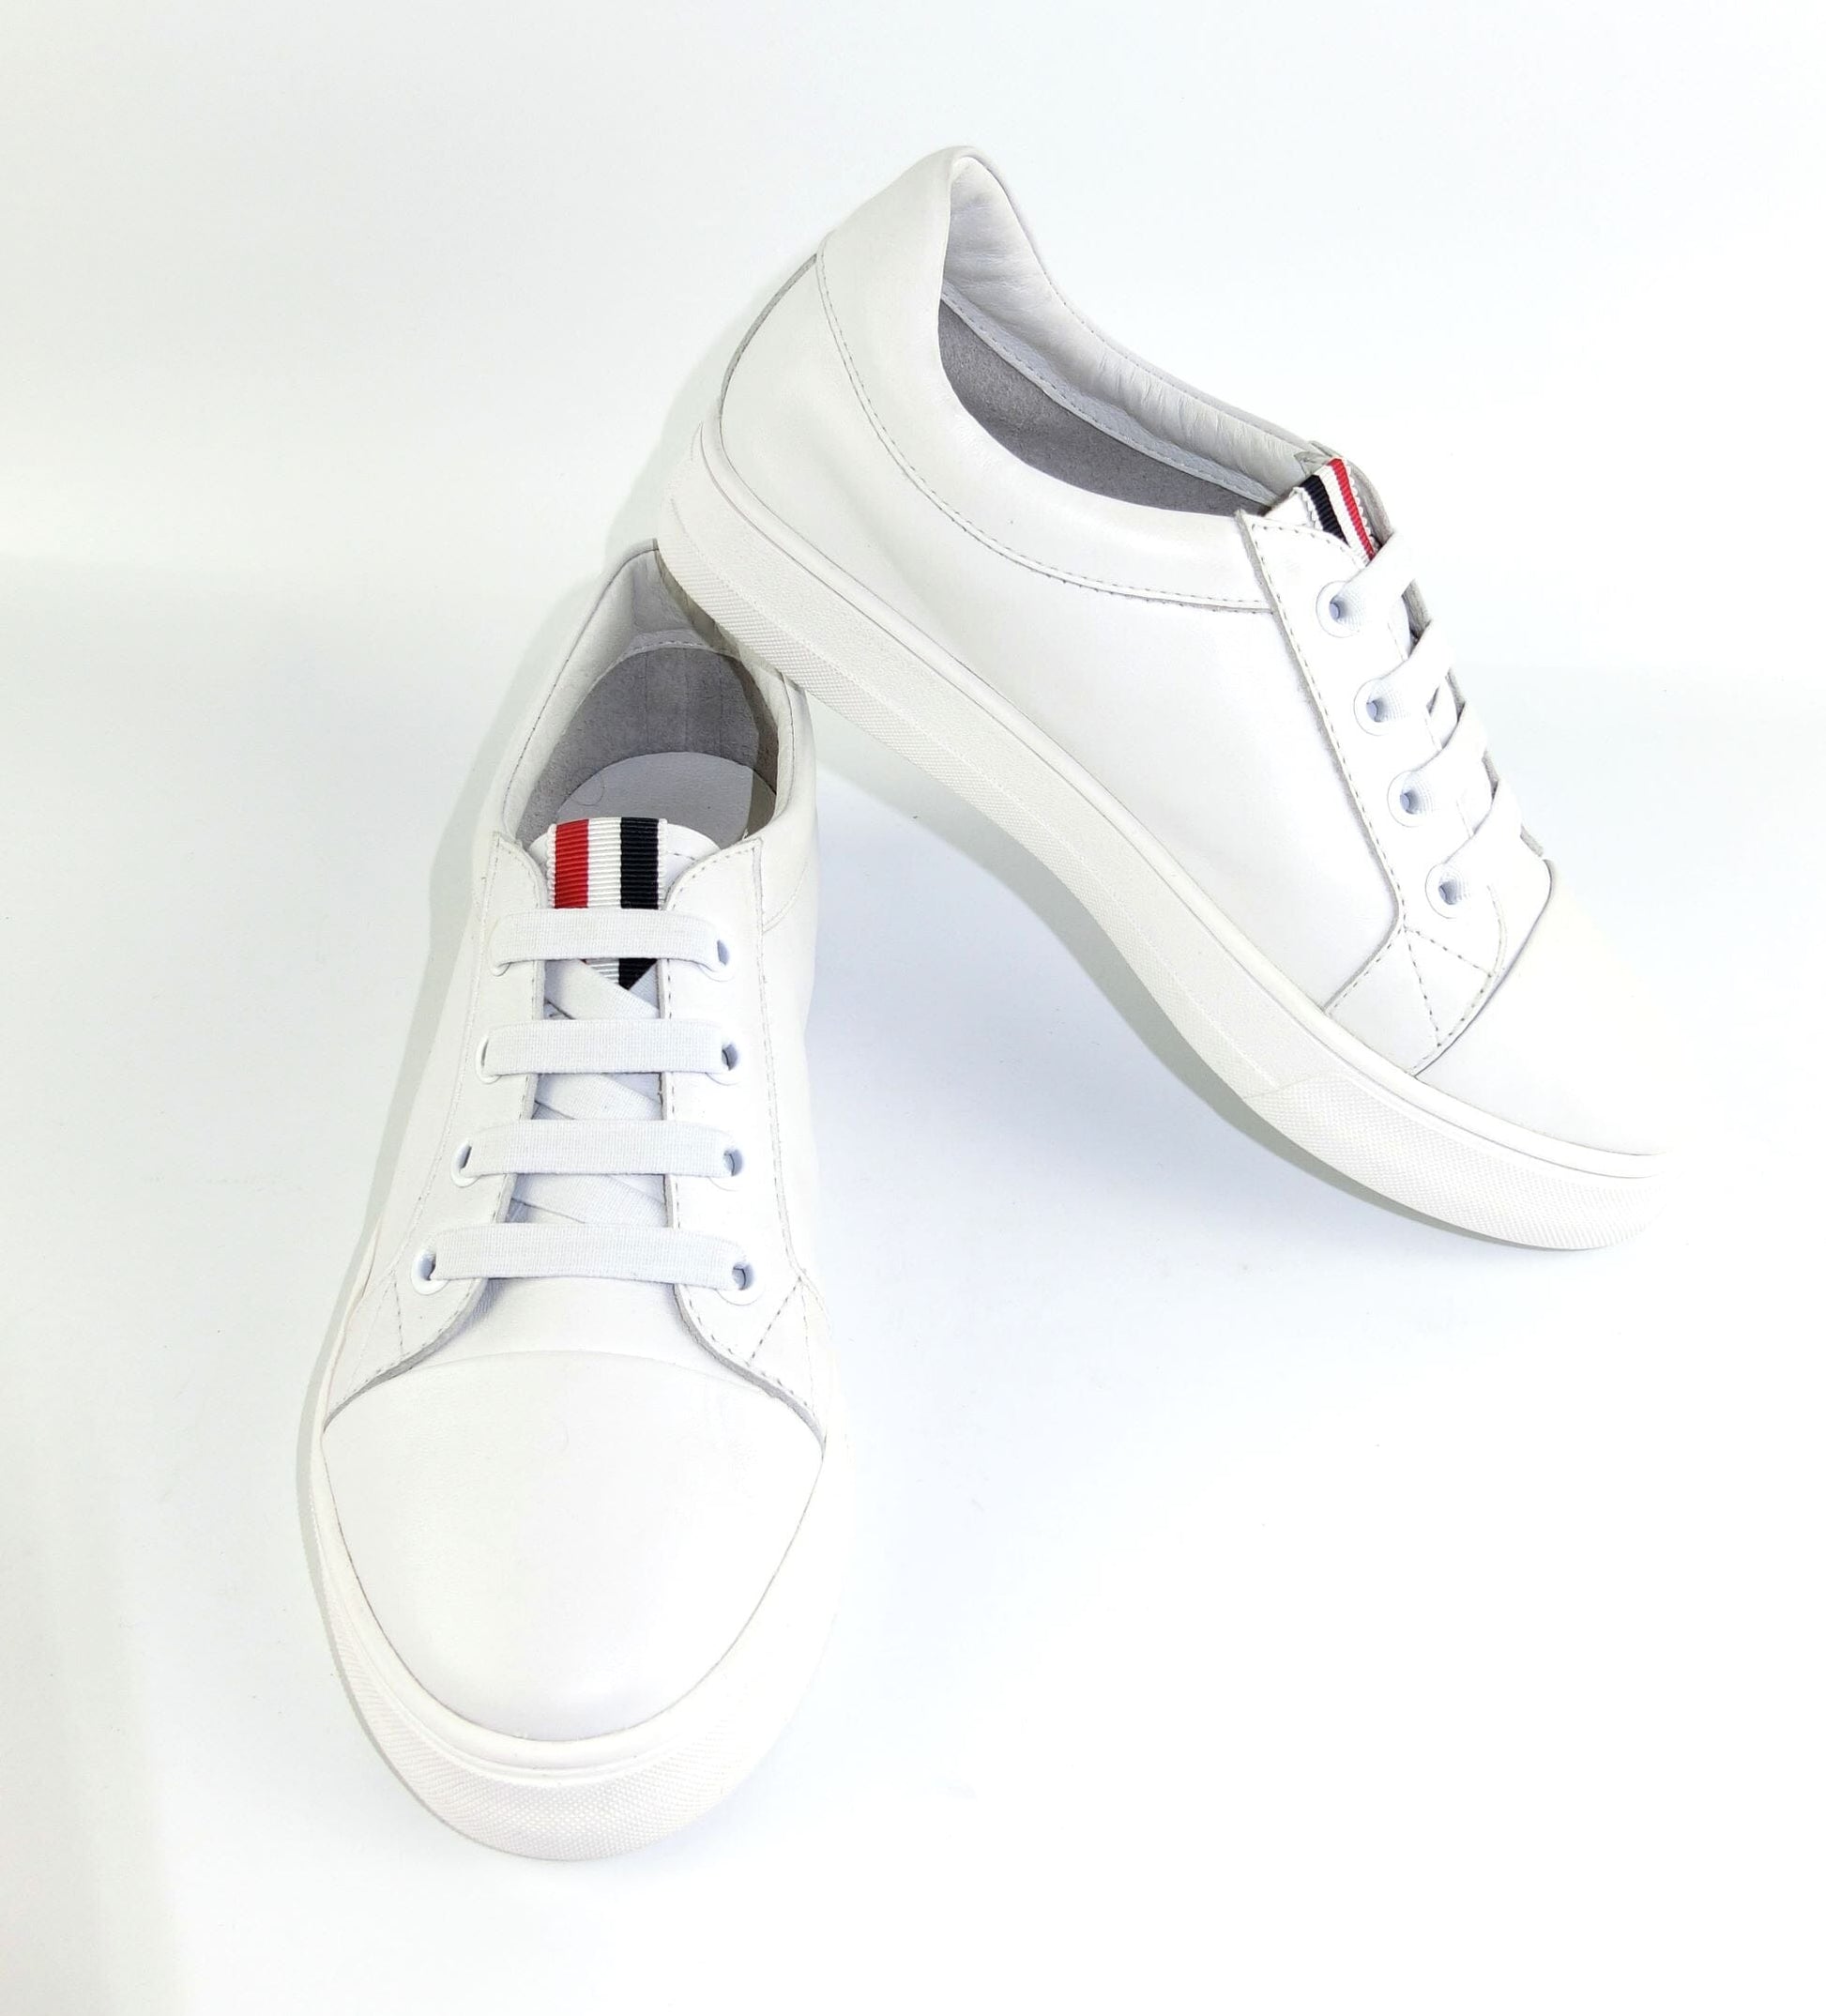 SS22003 Genuine leather sneakers with extra cushions- White with Blue/Red ribbons sneakers Sam Star Shoes 